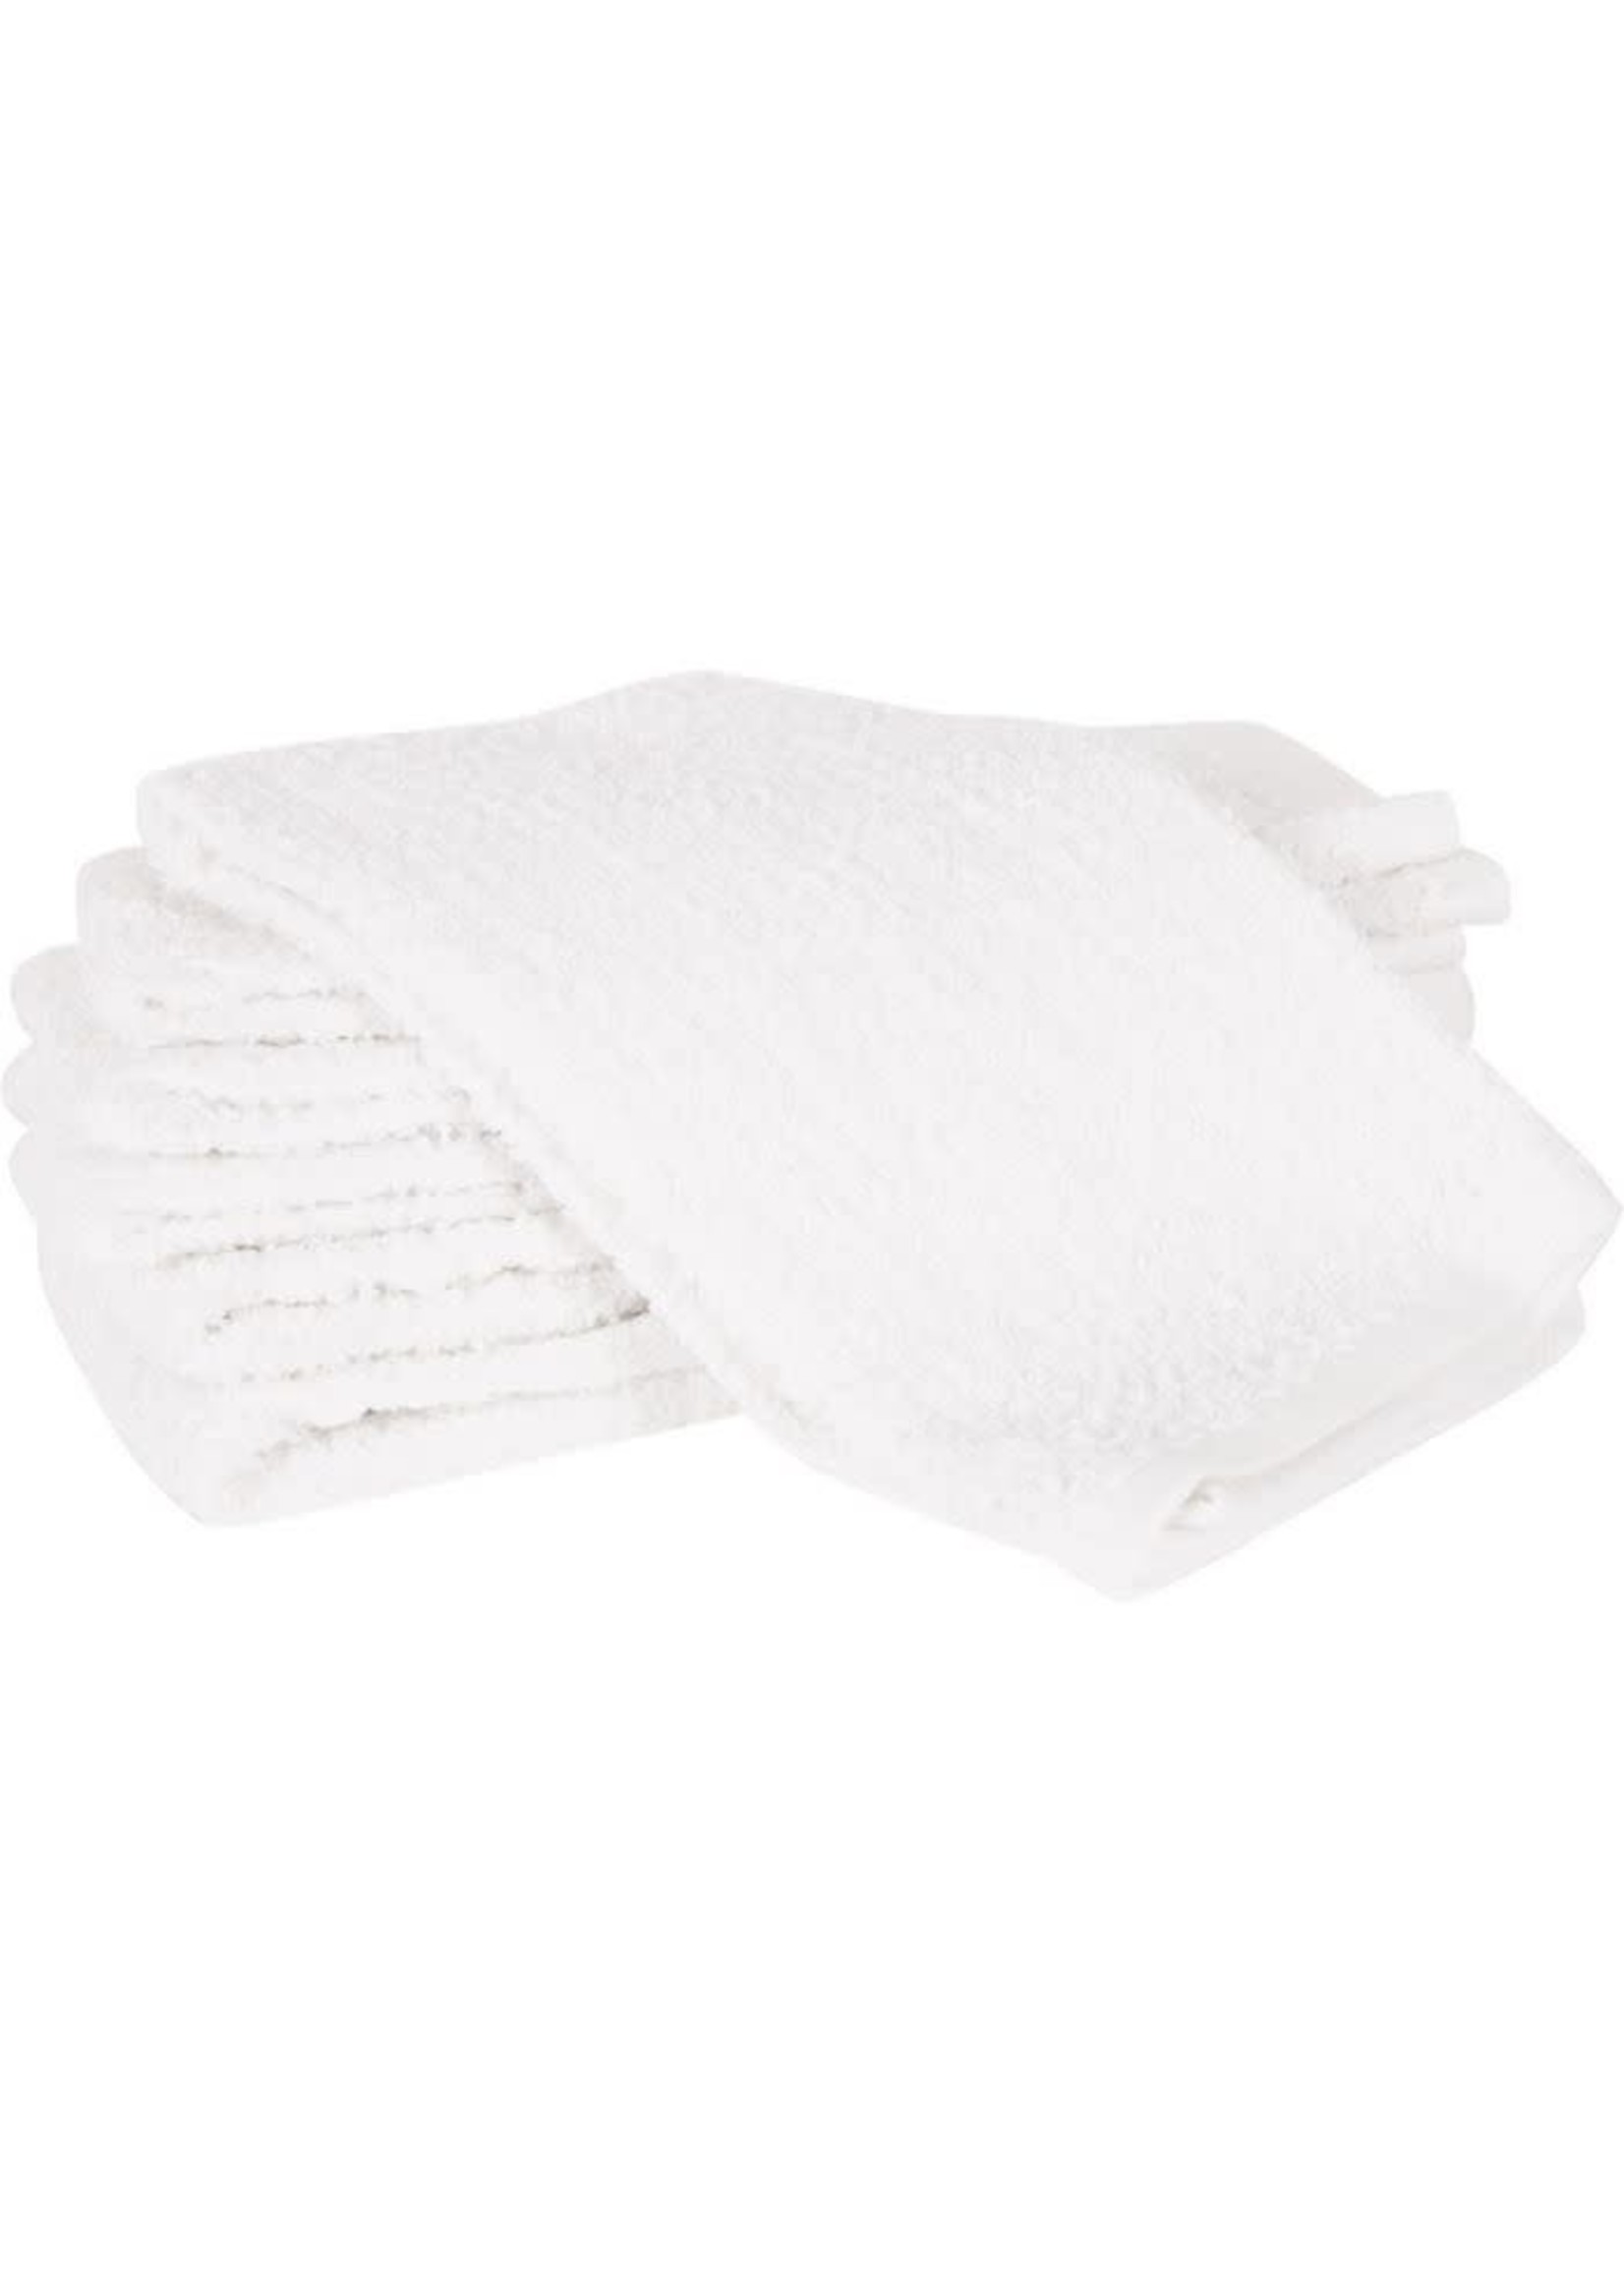 Simply Essential™ Bar Mop Kitchen Towels - White, 6 pk - Dillons Food Stores